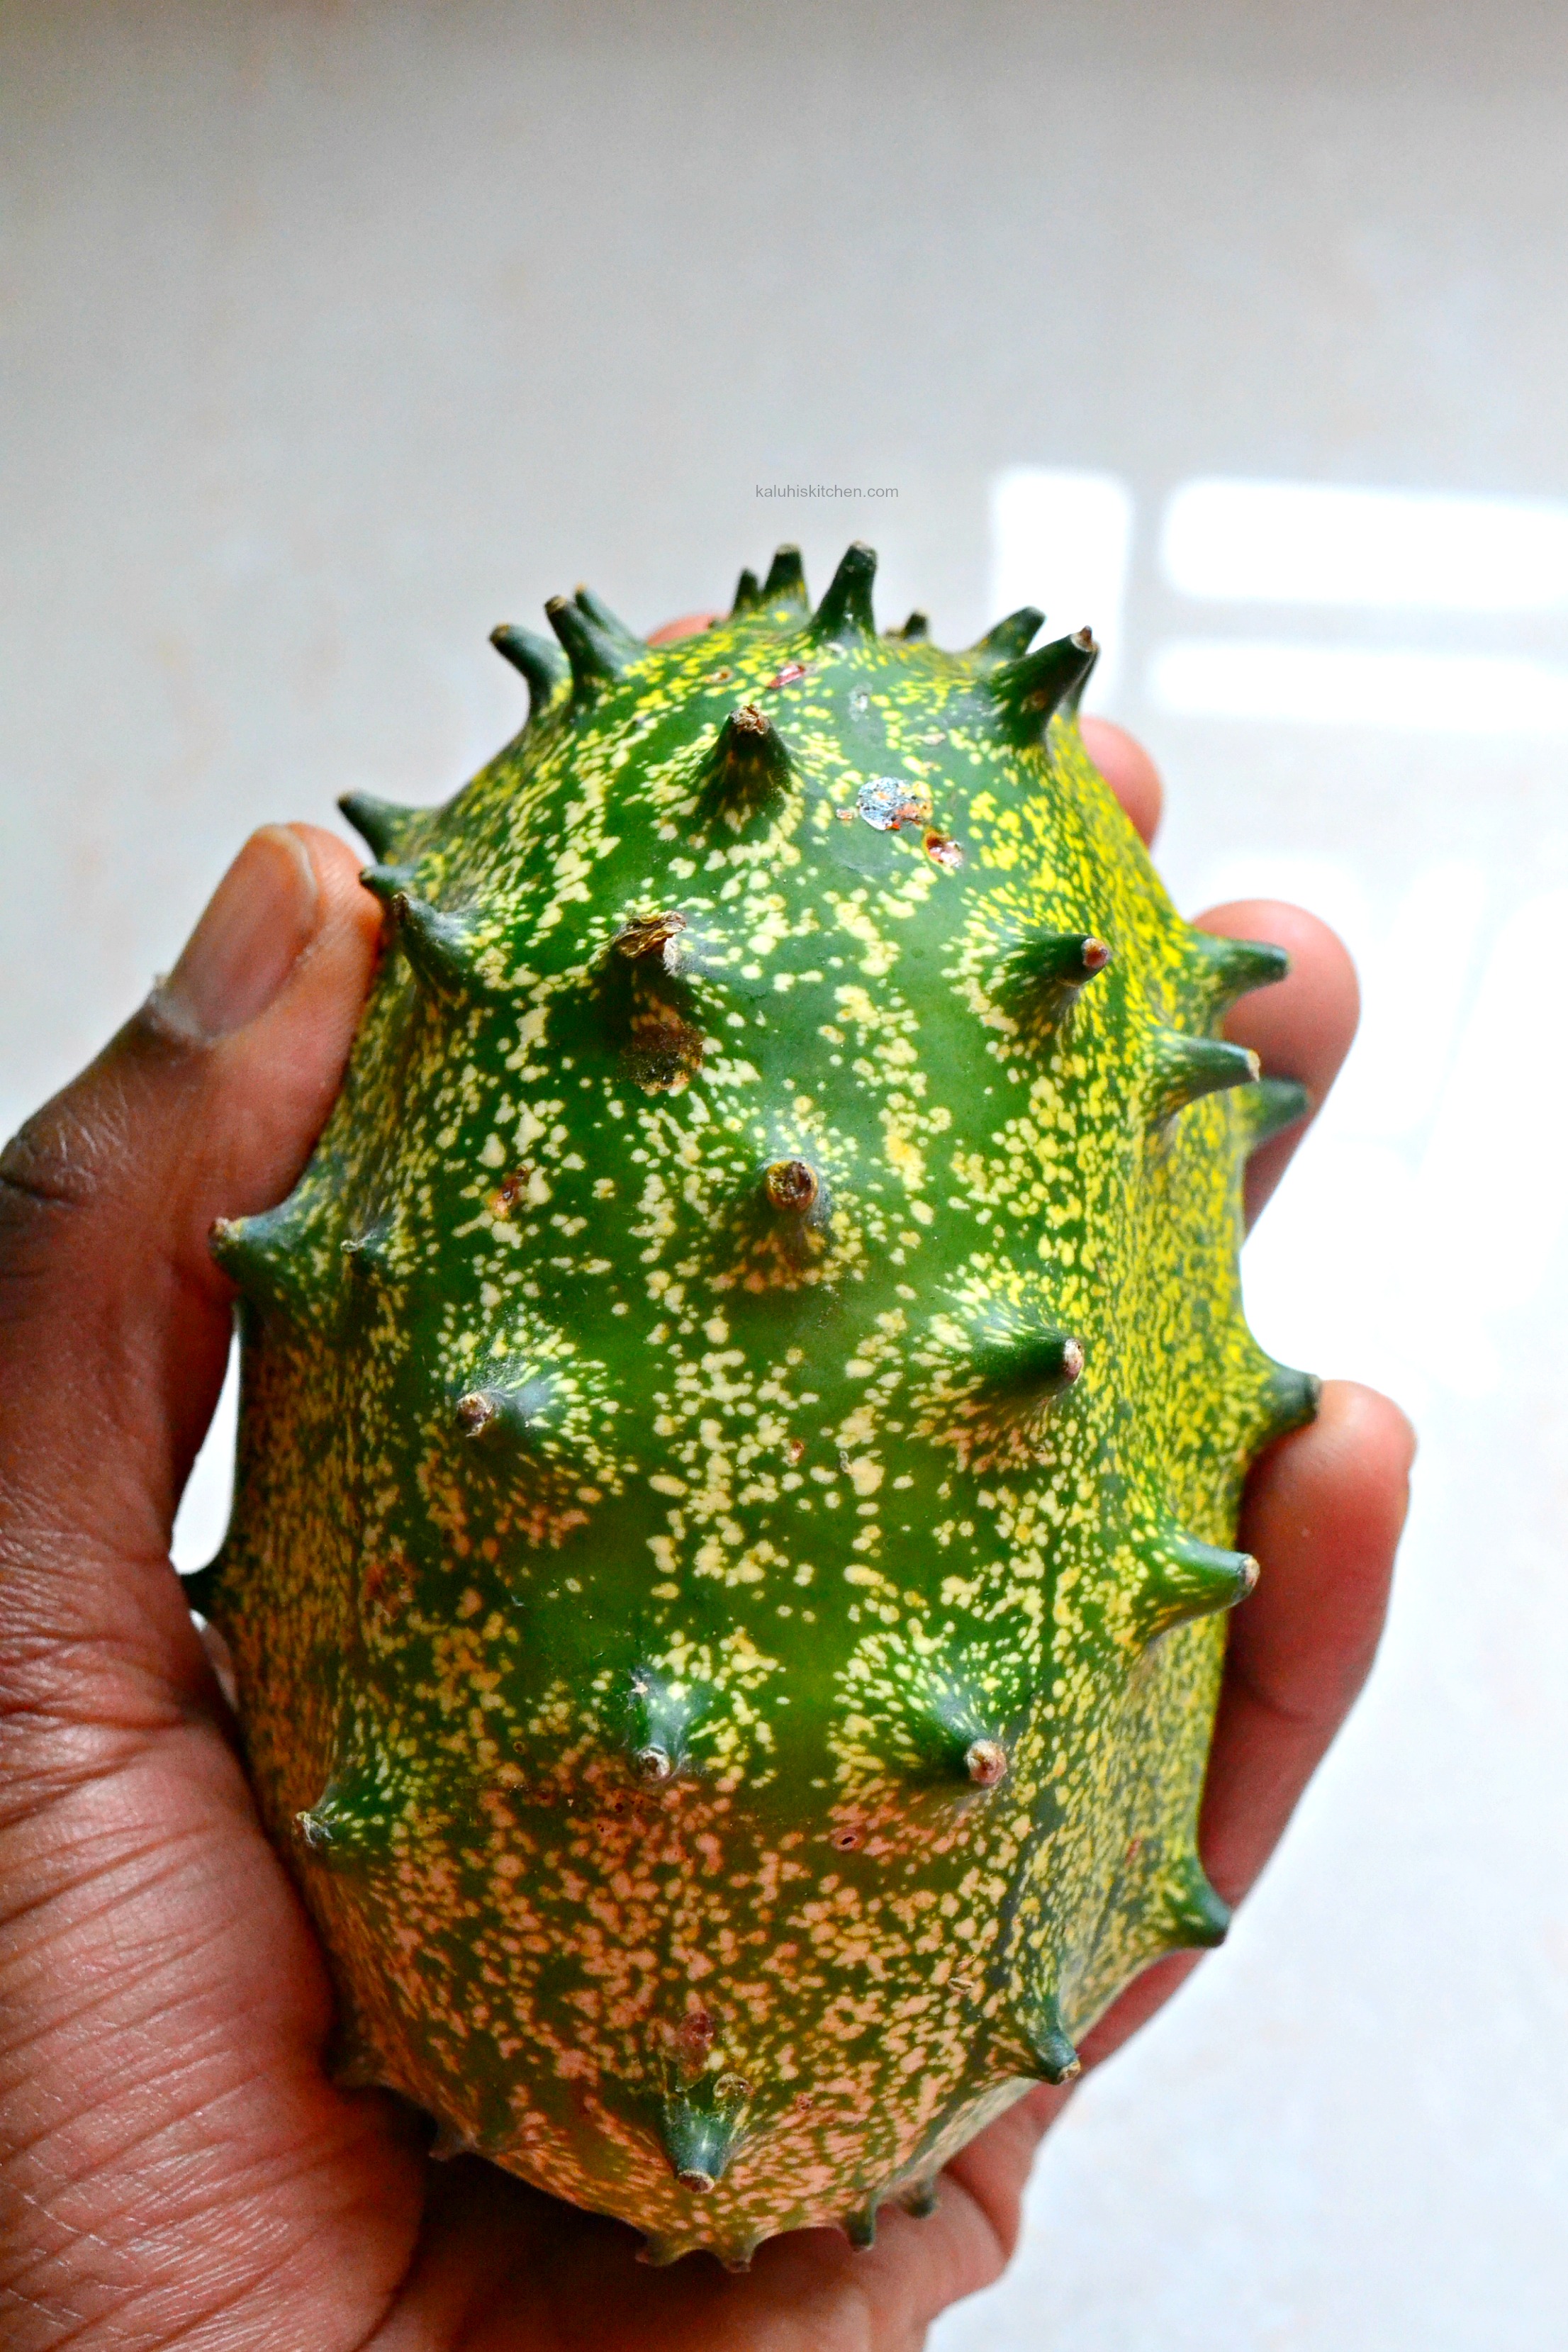 thorn-melon-fruit-common-in-kenya-with-a-near-bland-taste-but-enormous-nutritional-benefir_kaluhiskitchen-com